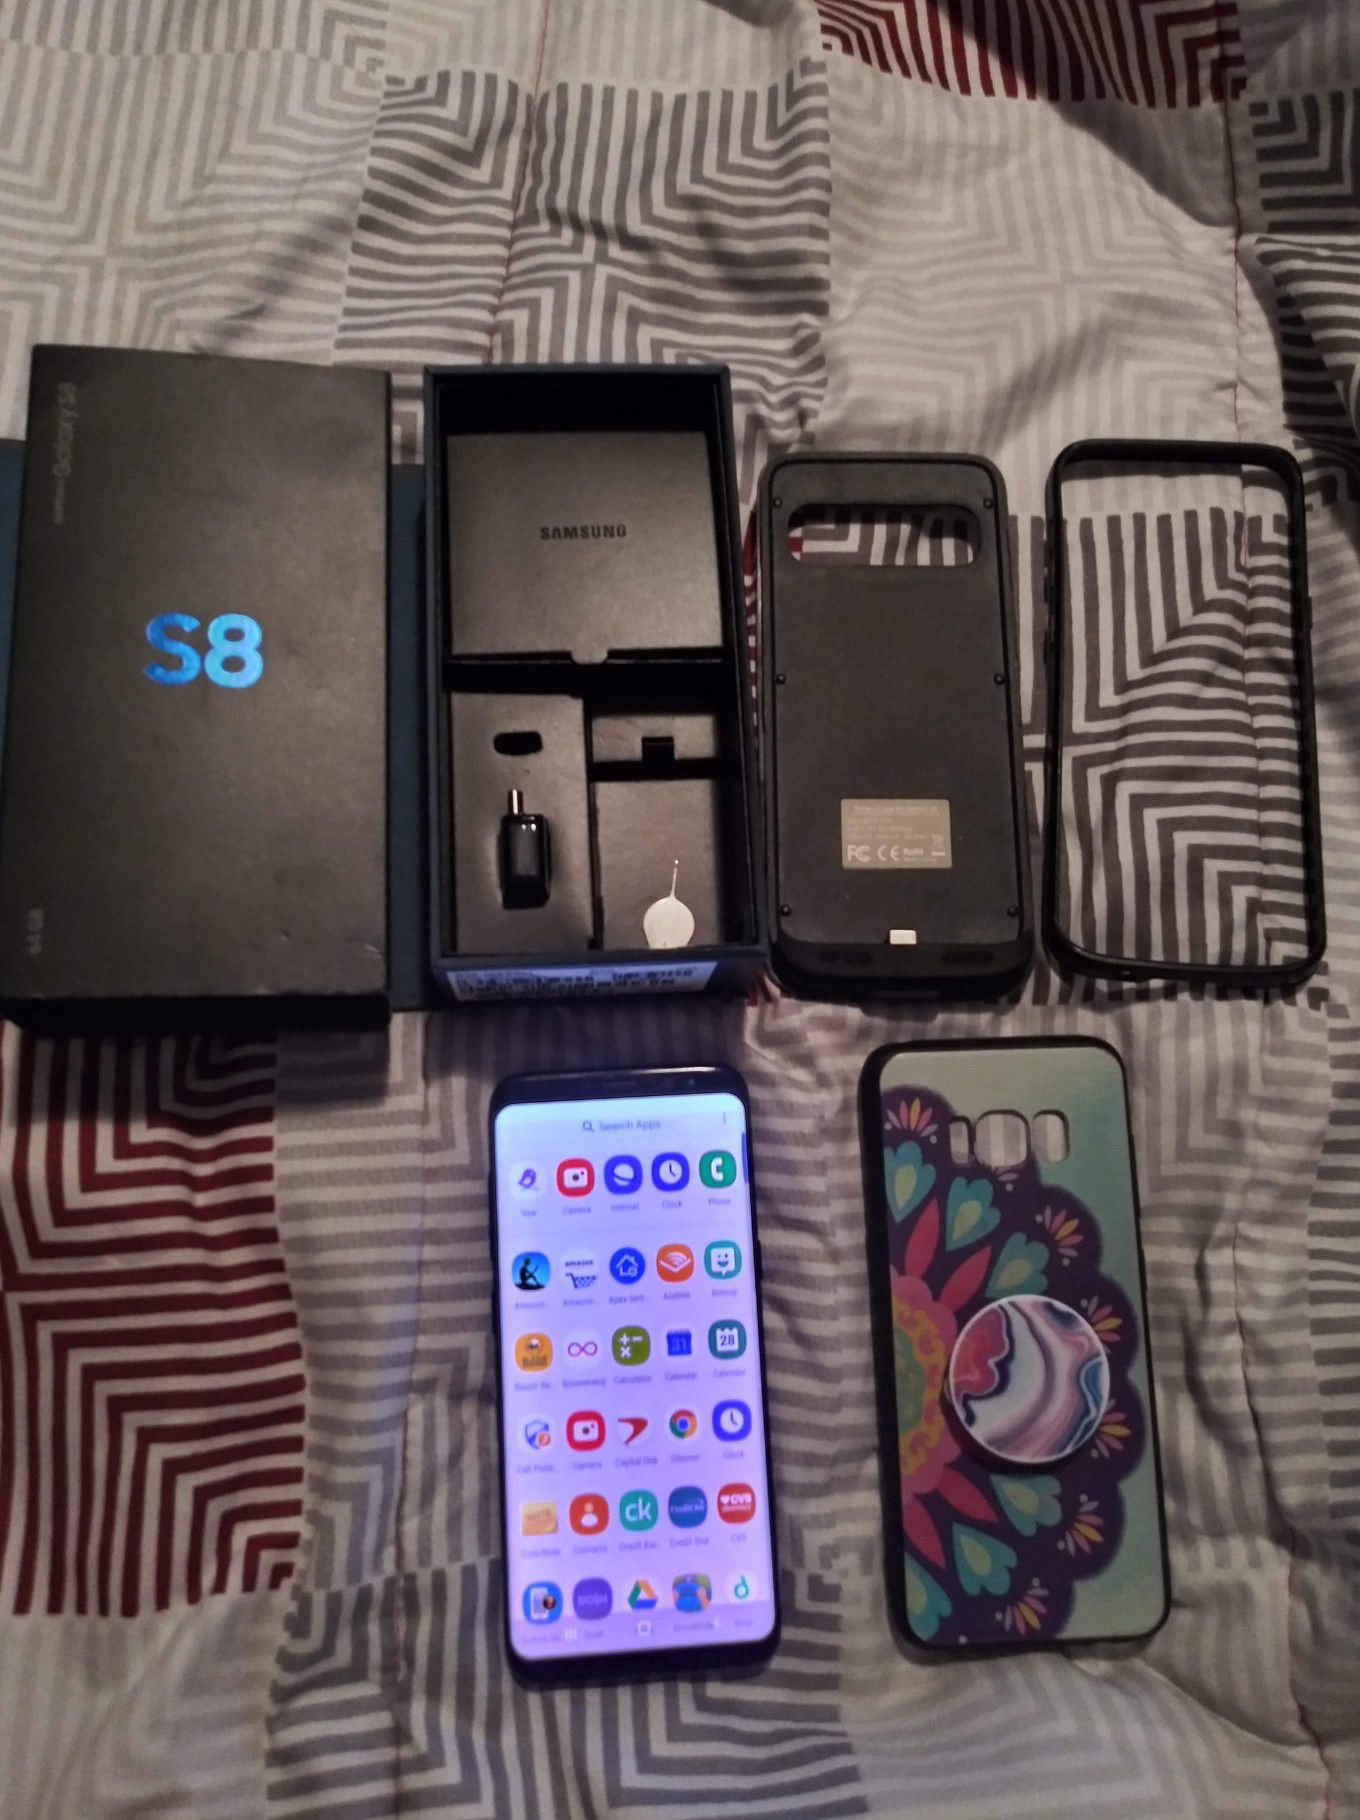 Samsung s8 galaxy 64gb phone case and case charger